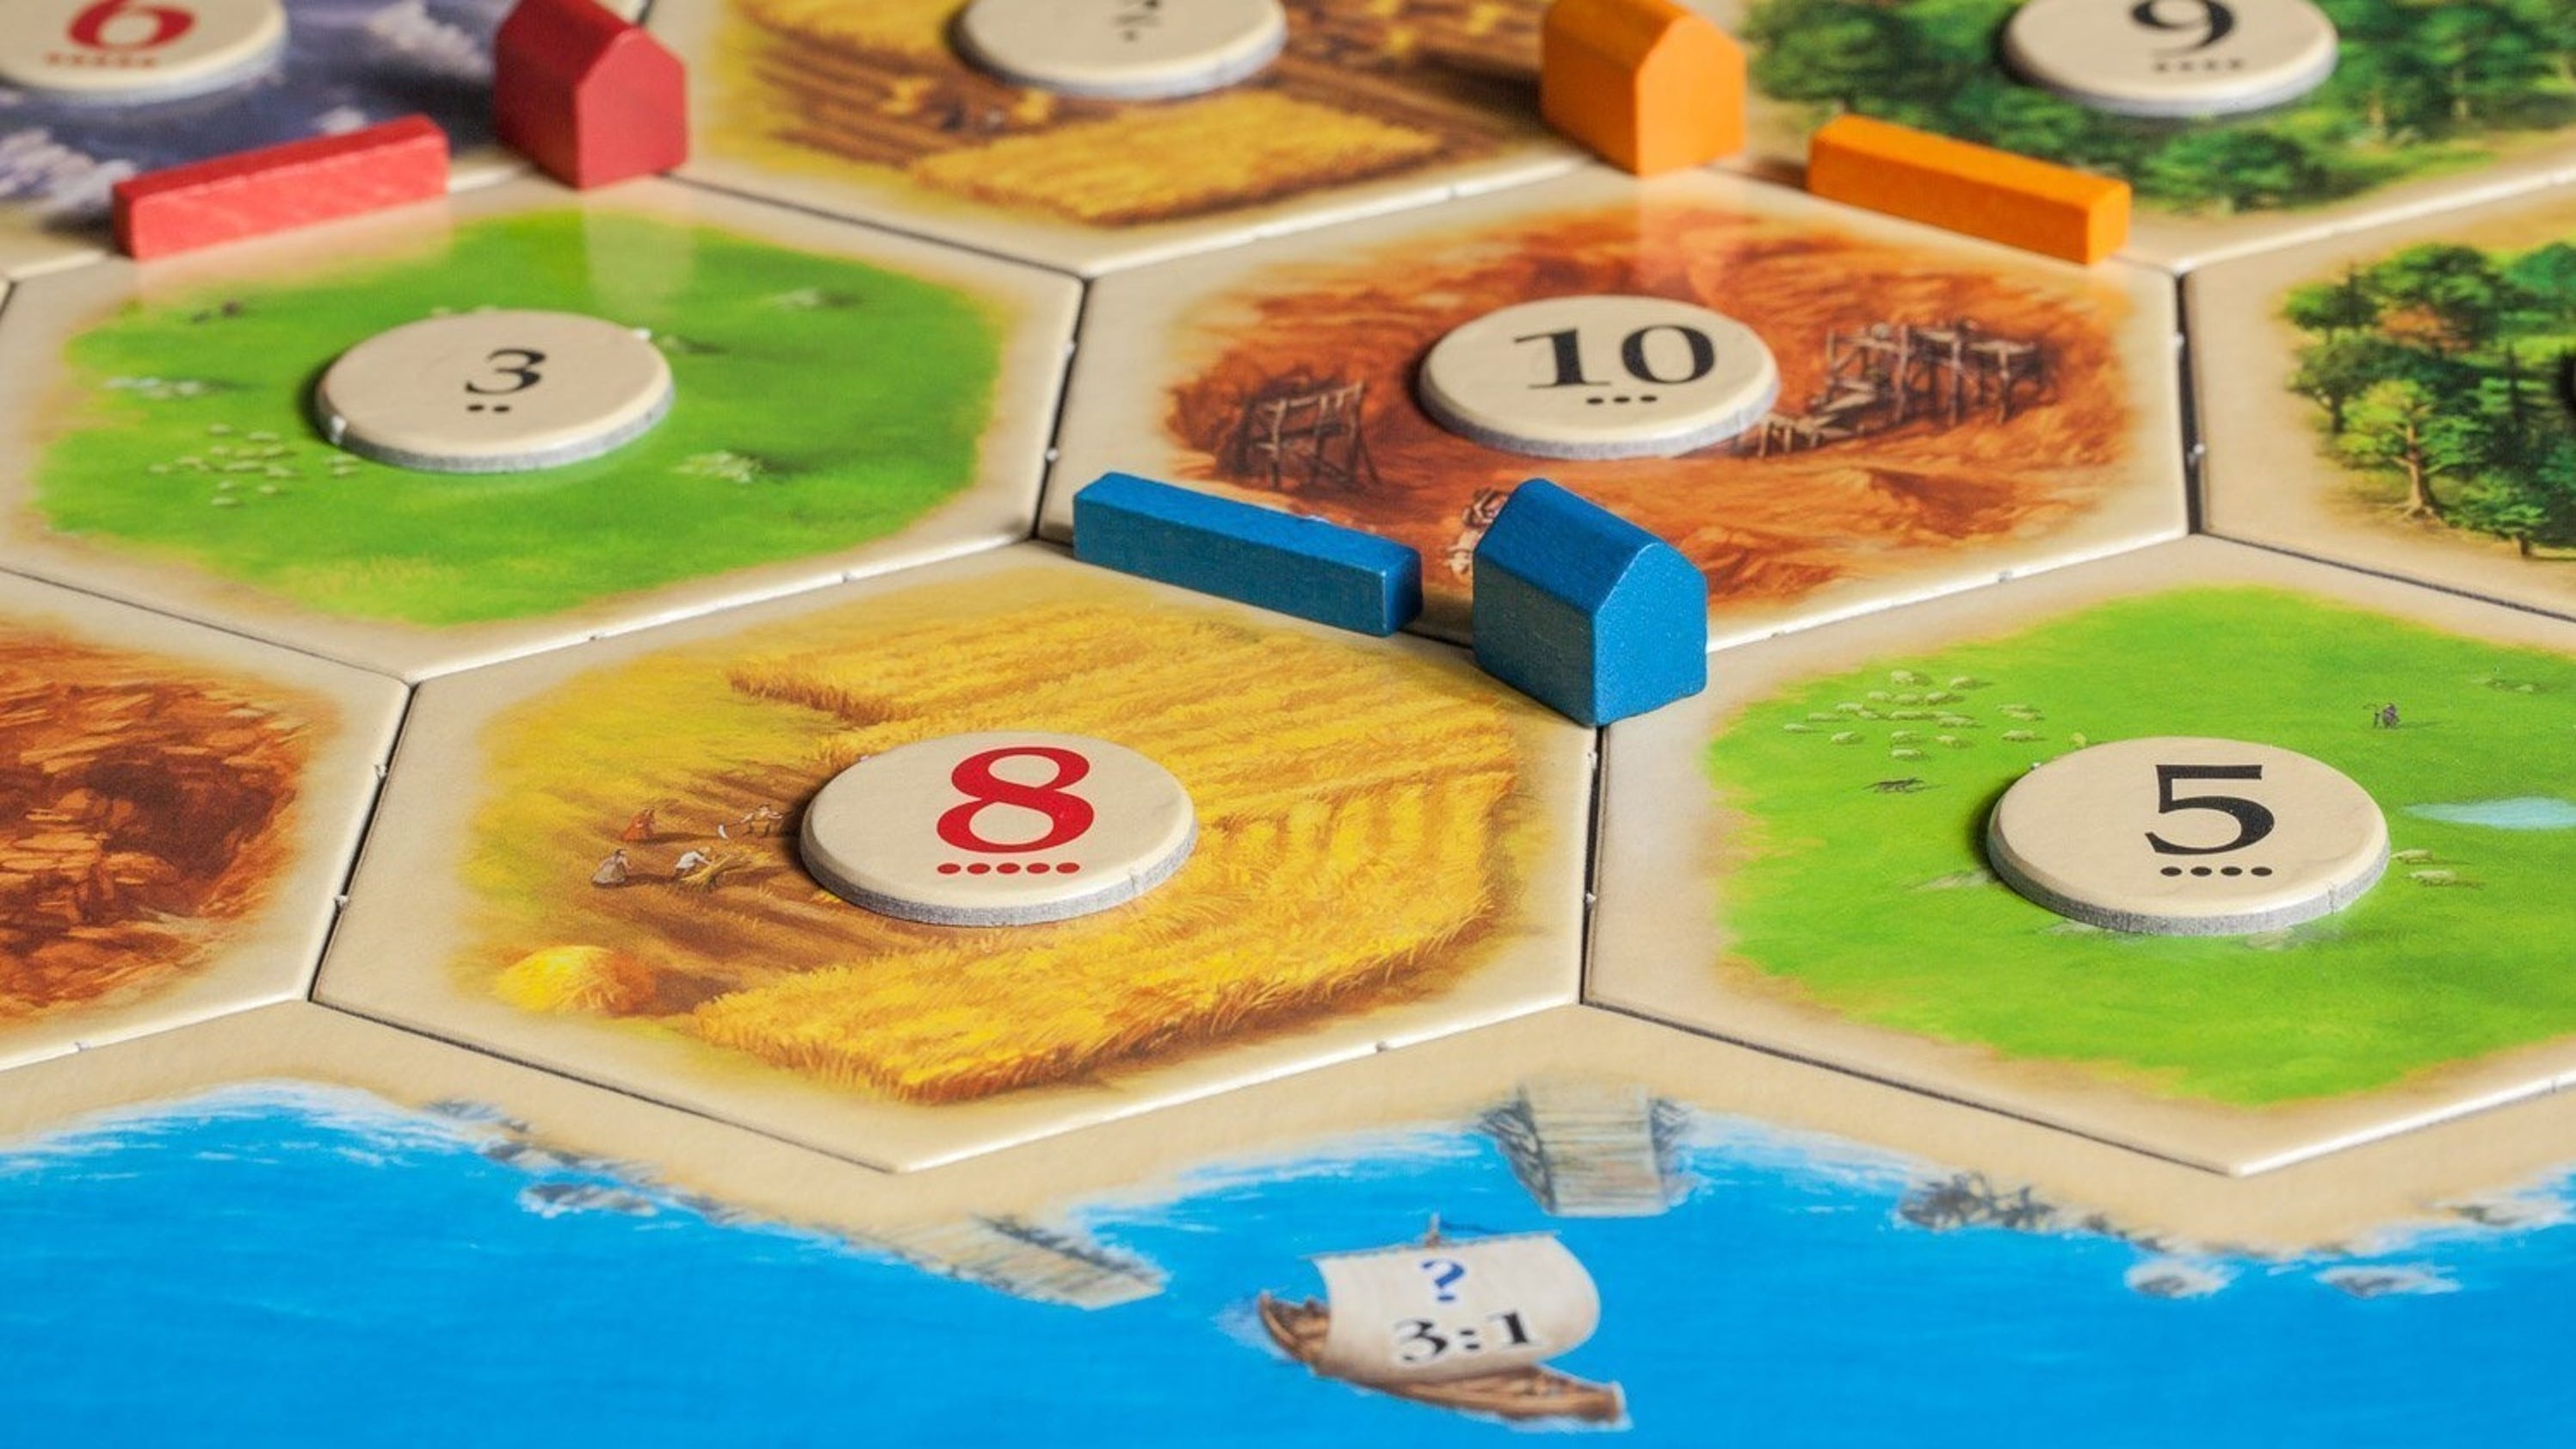 The 16 most popular board games of 2018